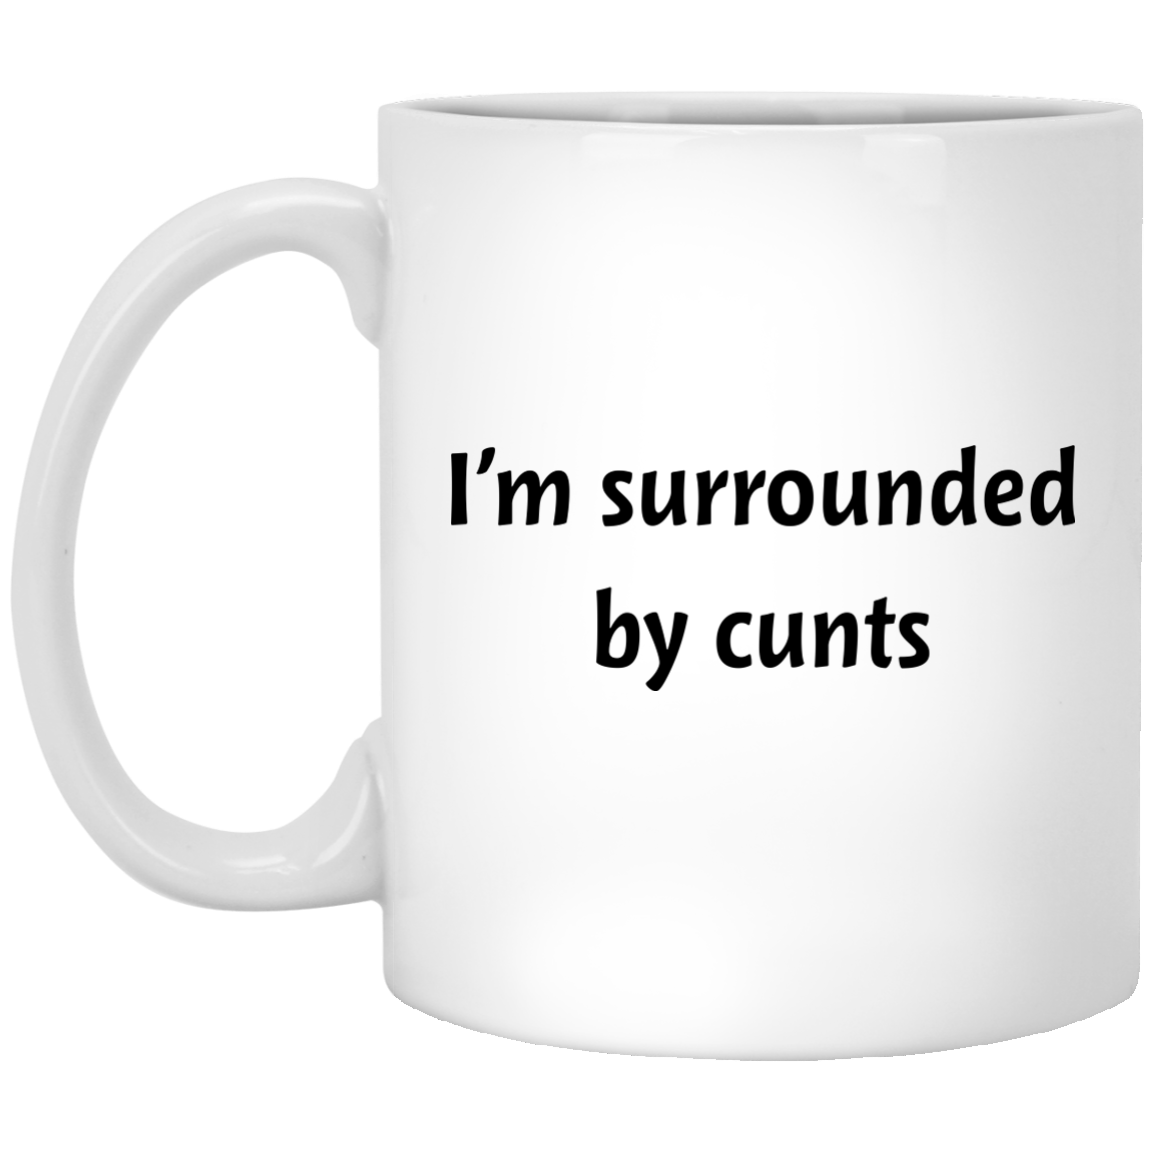 I’m surrounded by cunts mugs